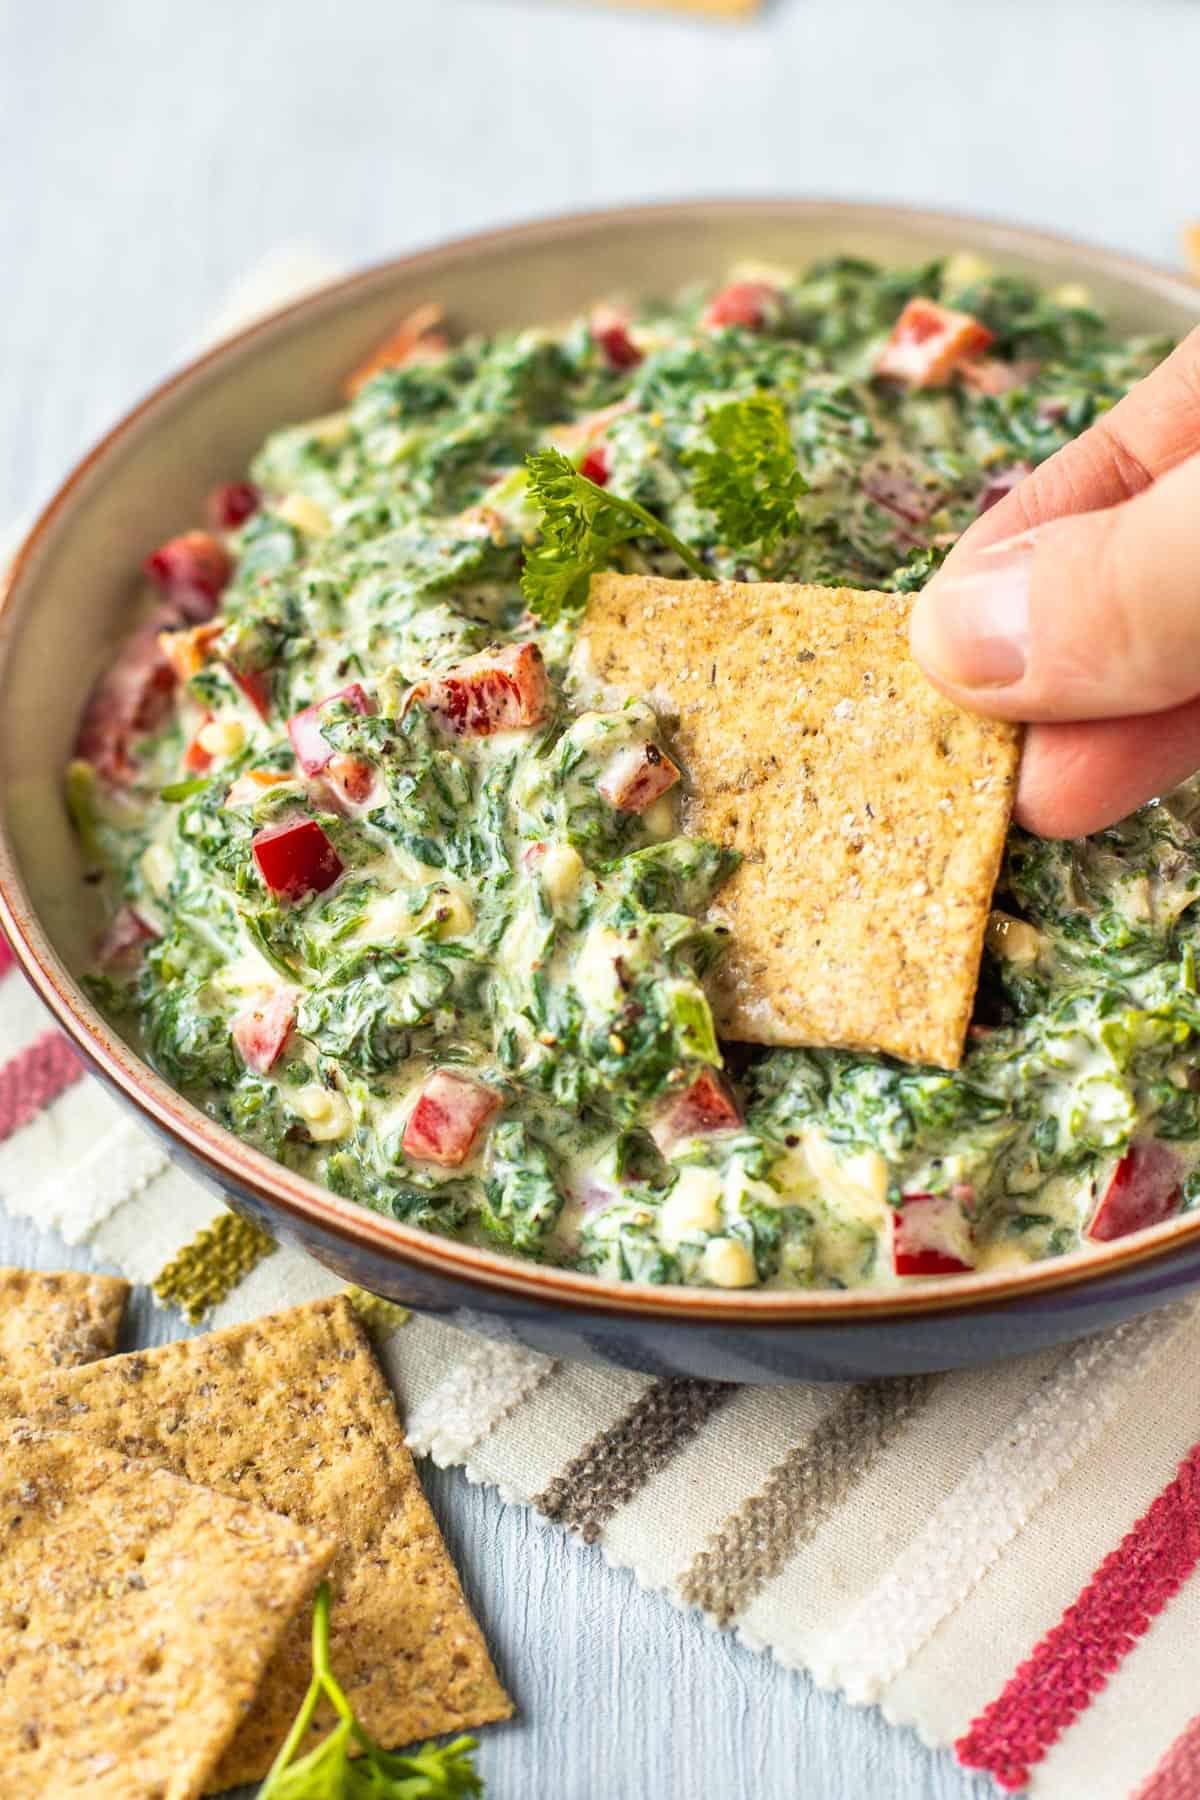 A cracker being dipped into cold and creamy spinach dip.